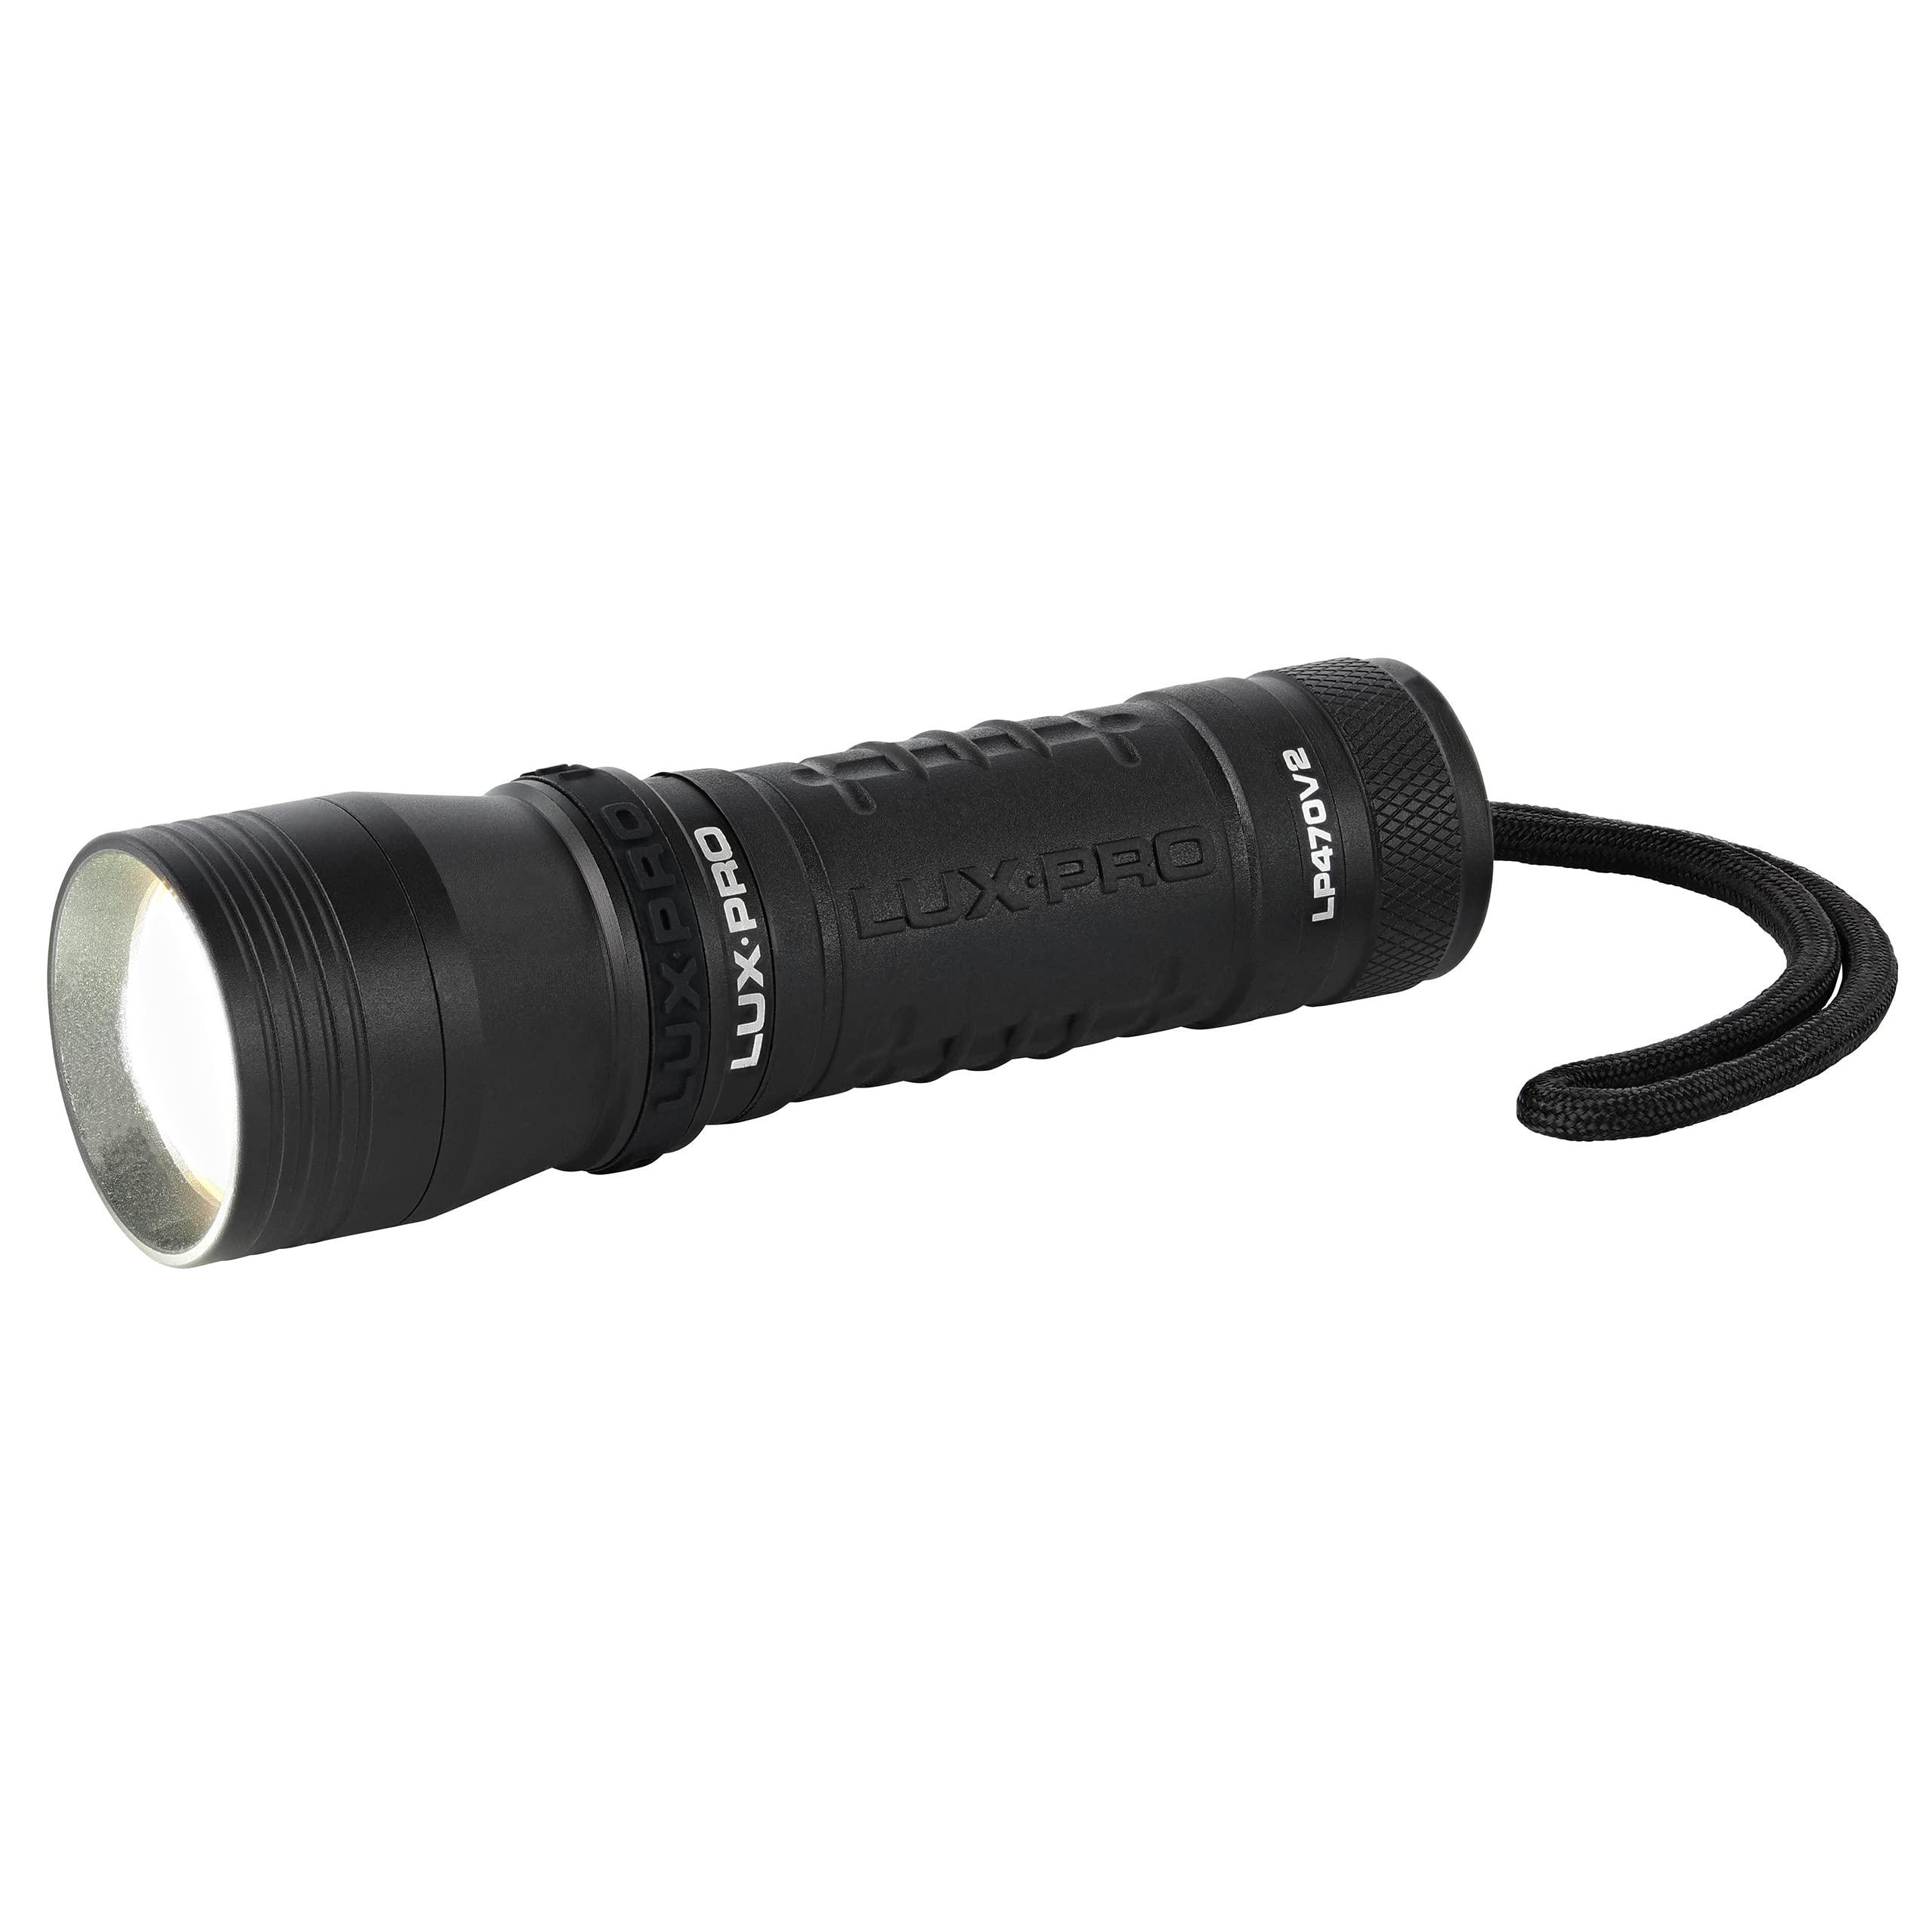 Lux-Pro luxpro focus 380 lumen handheld led flashlight - features patented tackgrip and aircraft-grade aluminum - pocket-sized campin